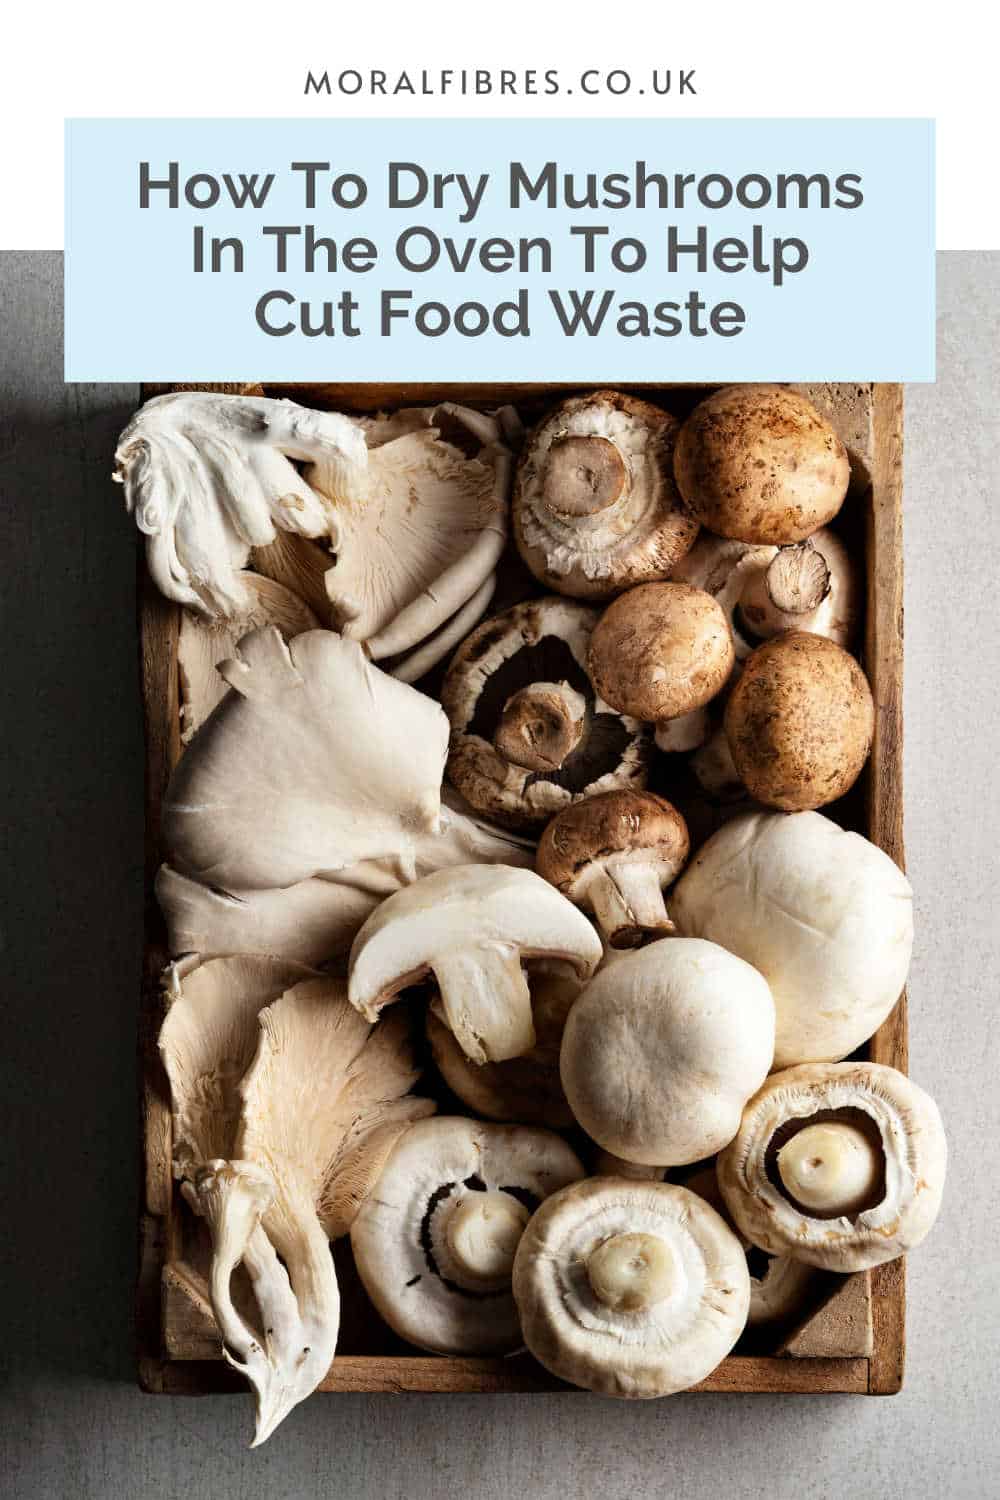 Tray of fungi with blue text box that reads how to dry mushrooms in the oven to help cut food waste.